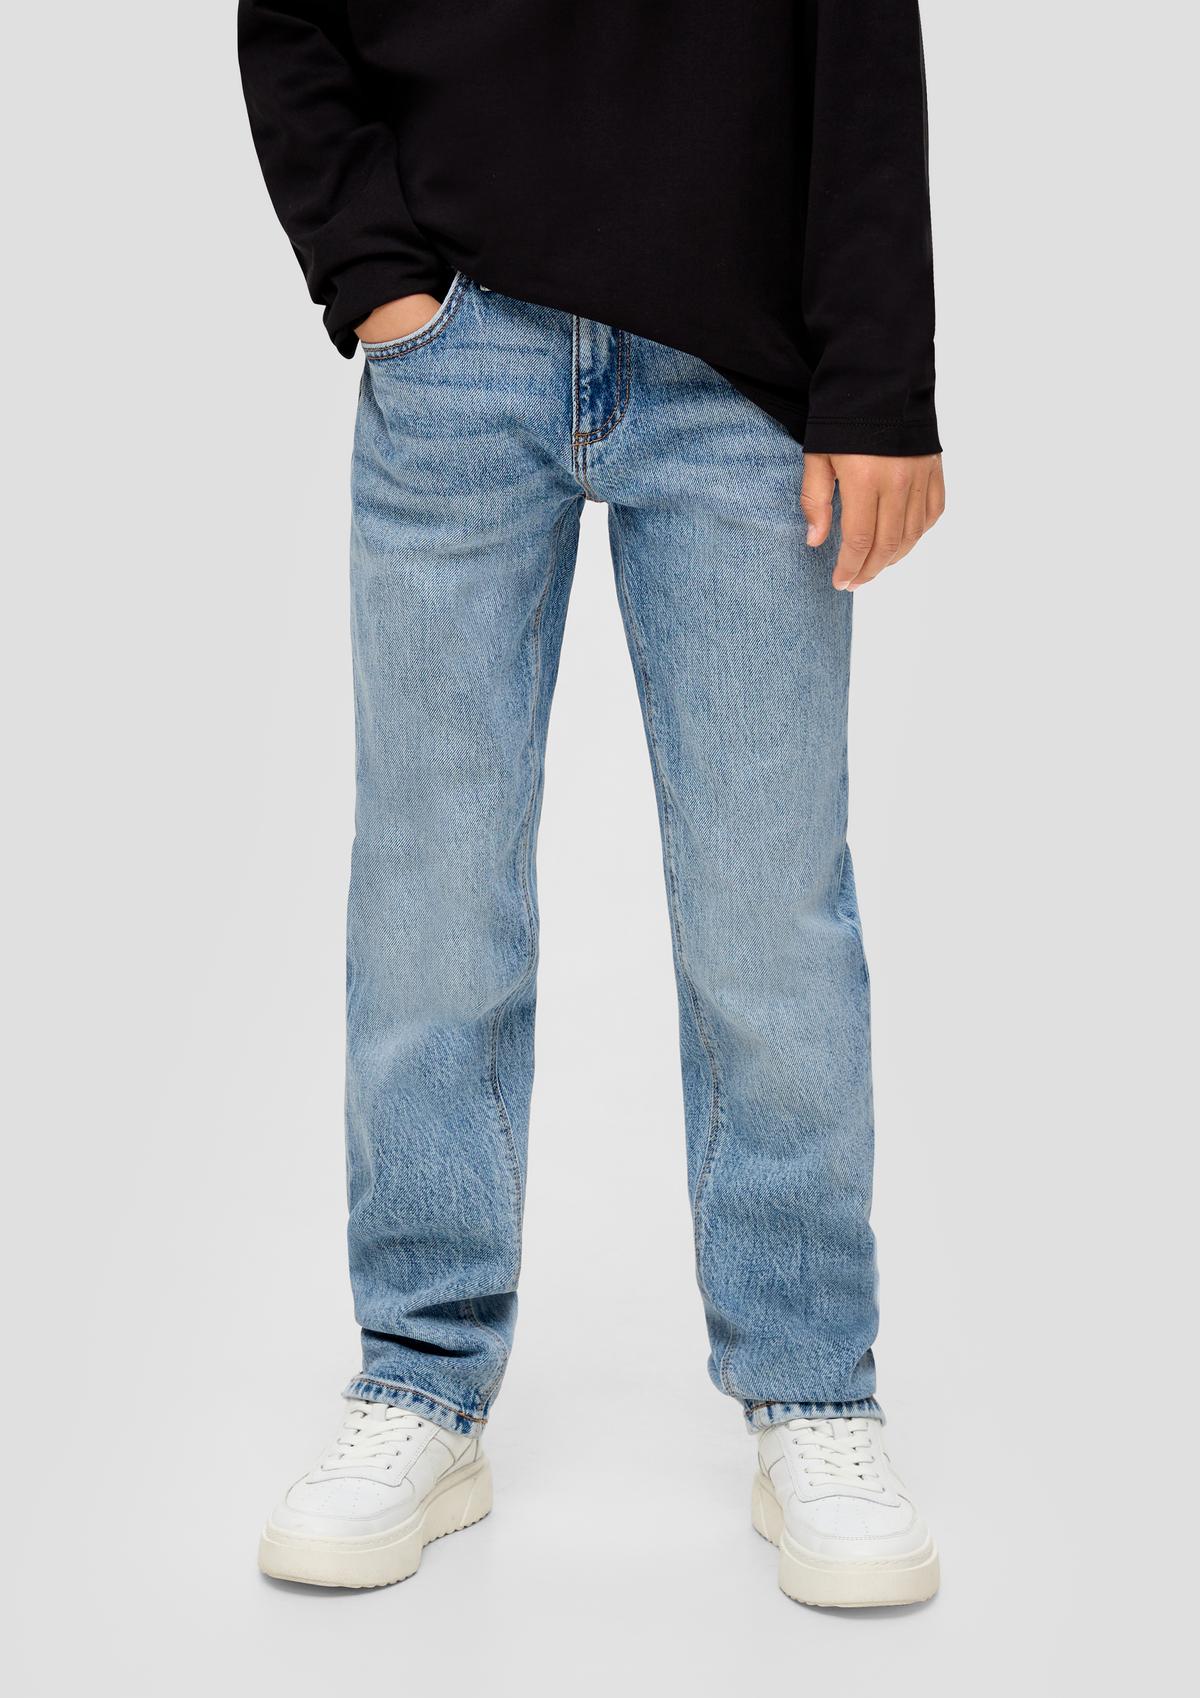 Regular: jeans made of stretch cotton